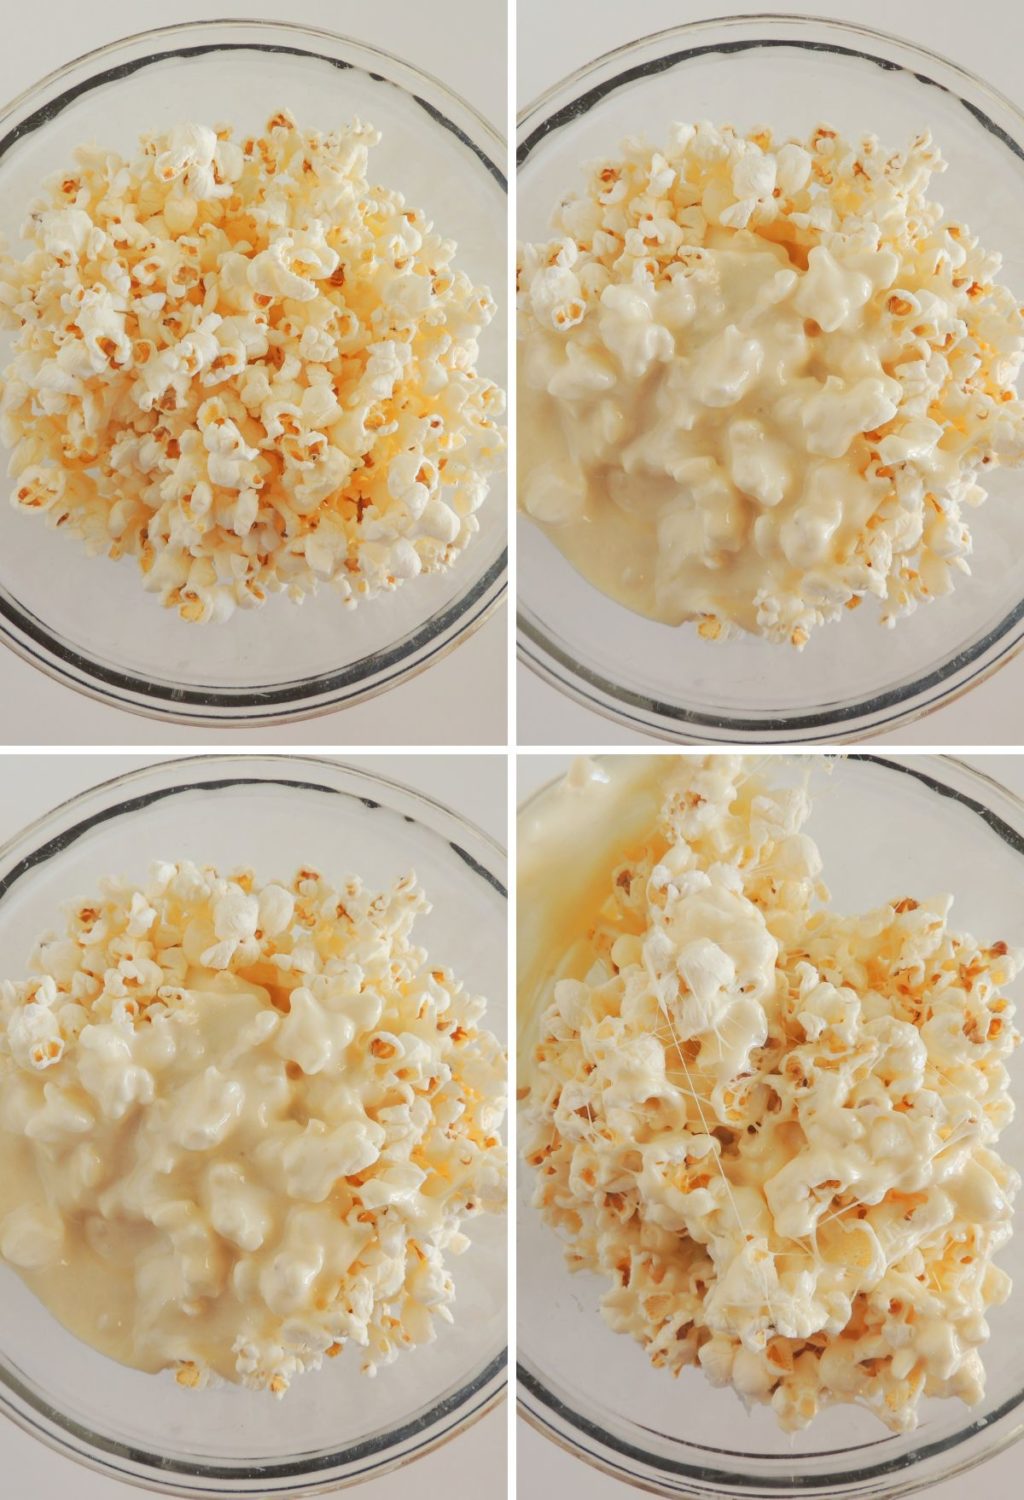 Four pictures showing how to make popcorn.